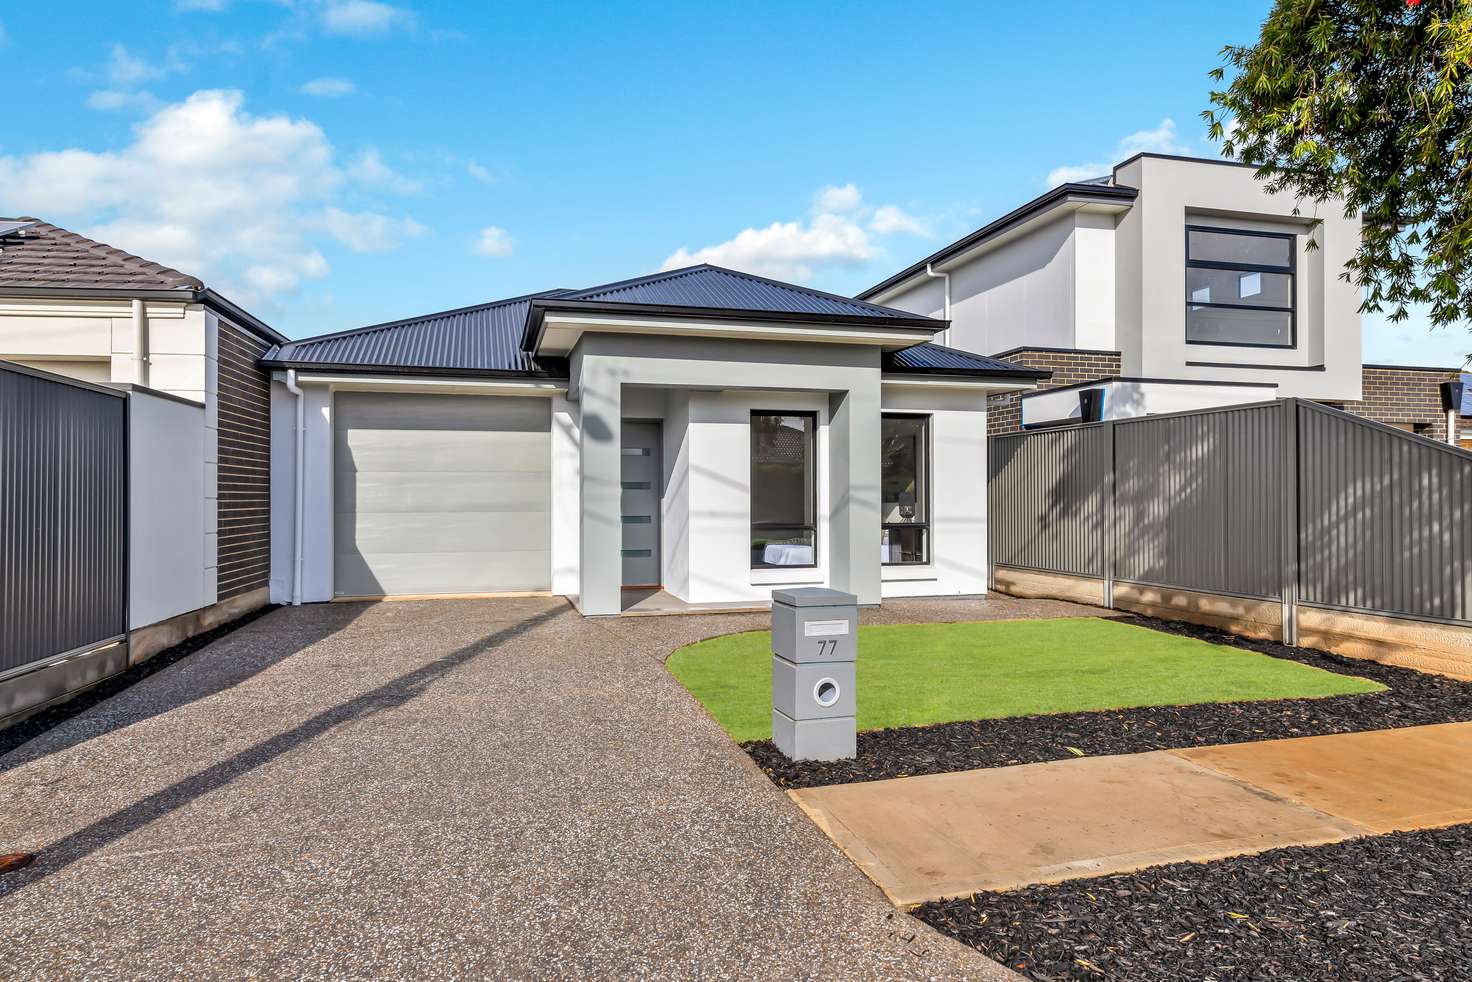 Main view of Homely house listing, 77 Balmoral Avenue, Warradale SA 5046